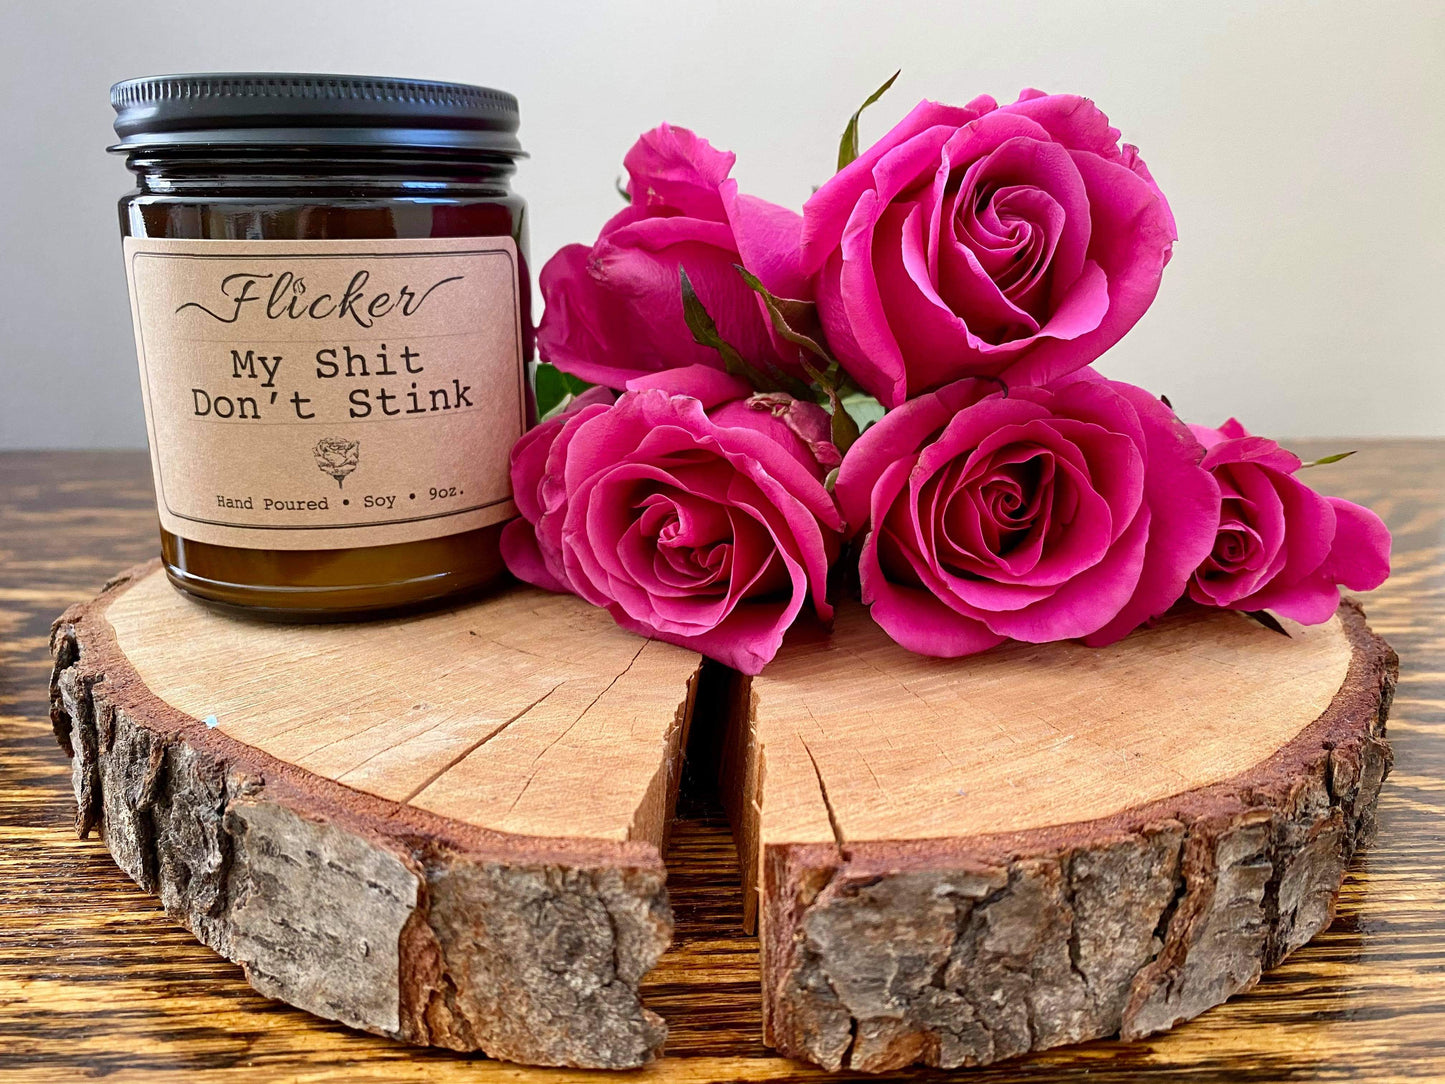 My Shit Don't Stink - Rose Scented Candle